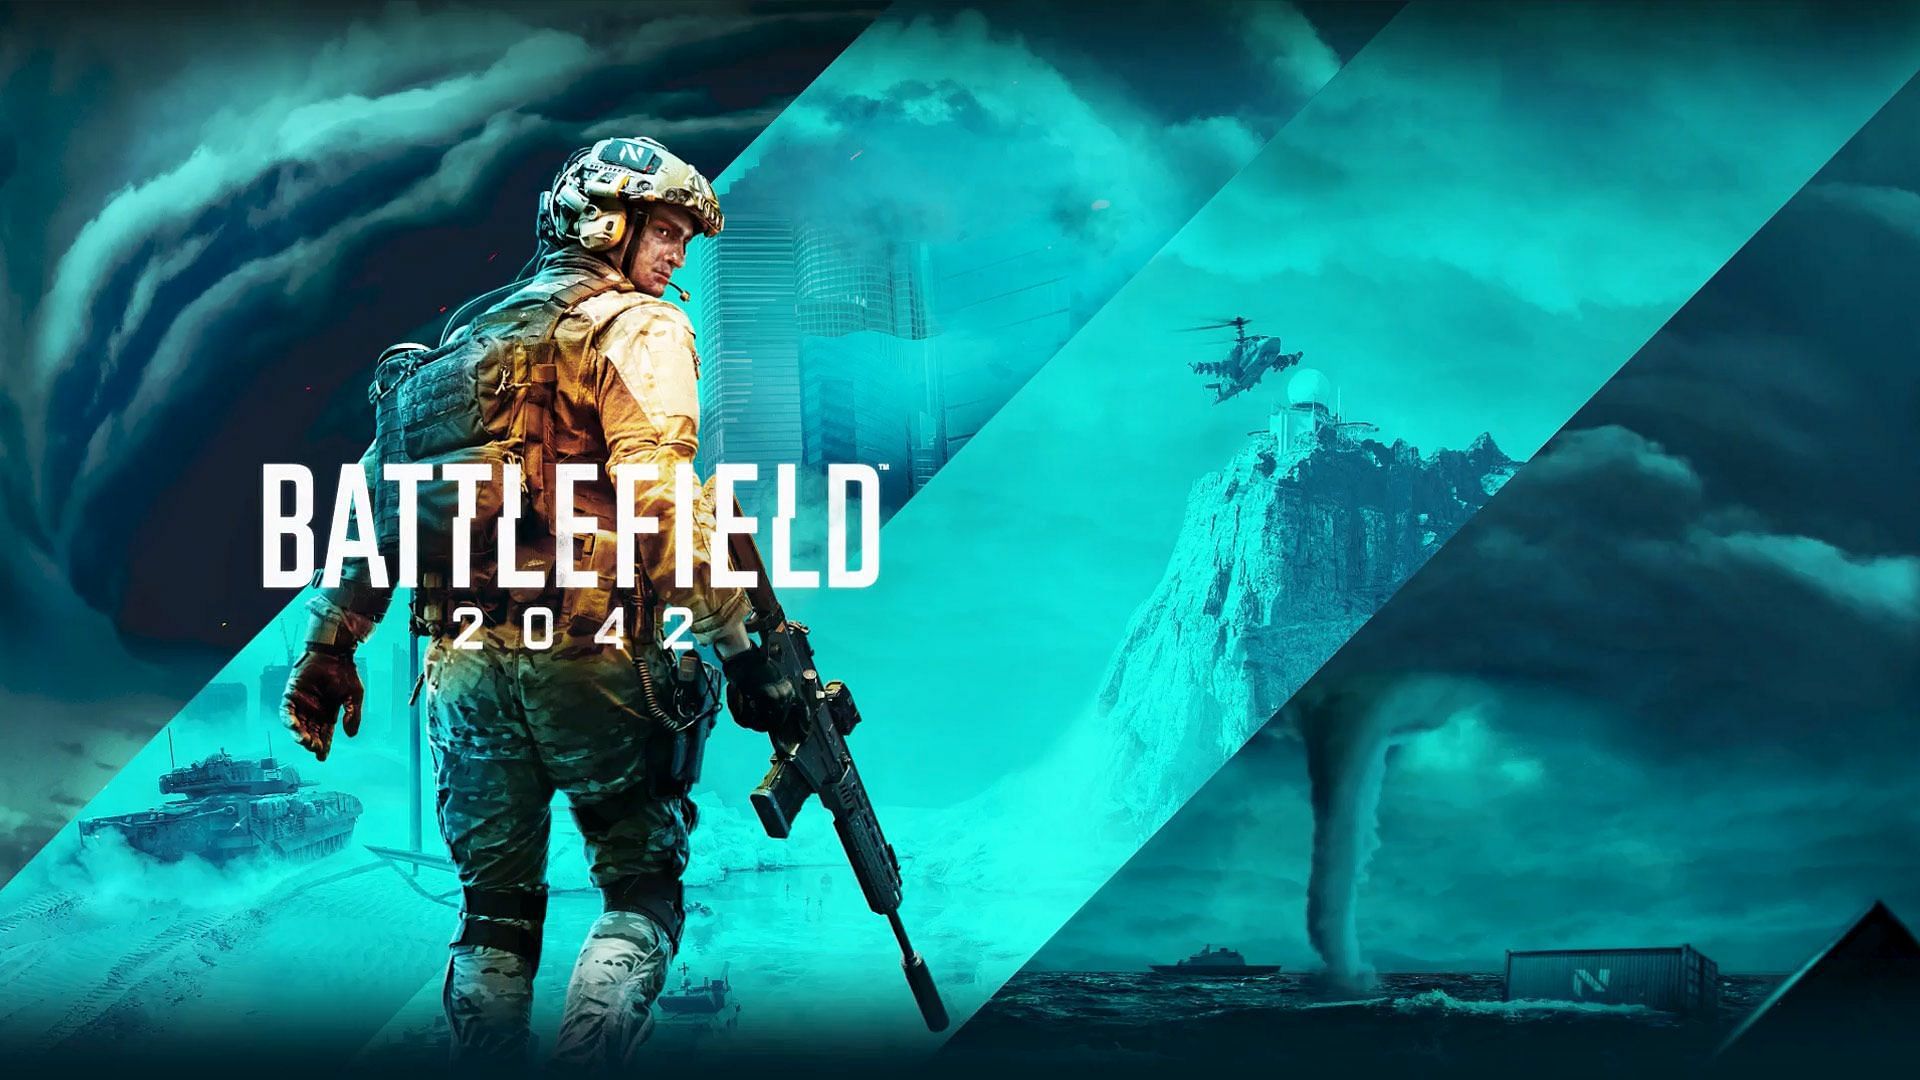 A new Battlefield game is in the making (Image via DICE)